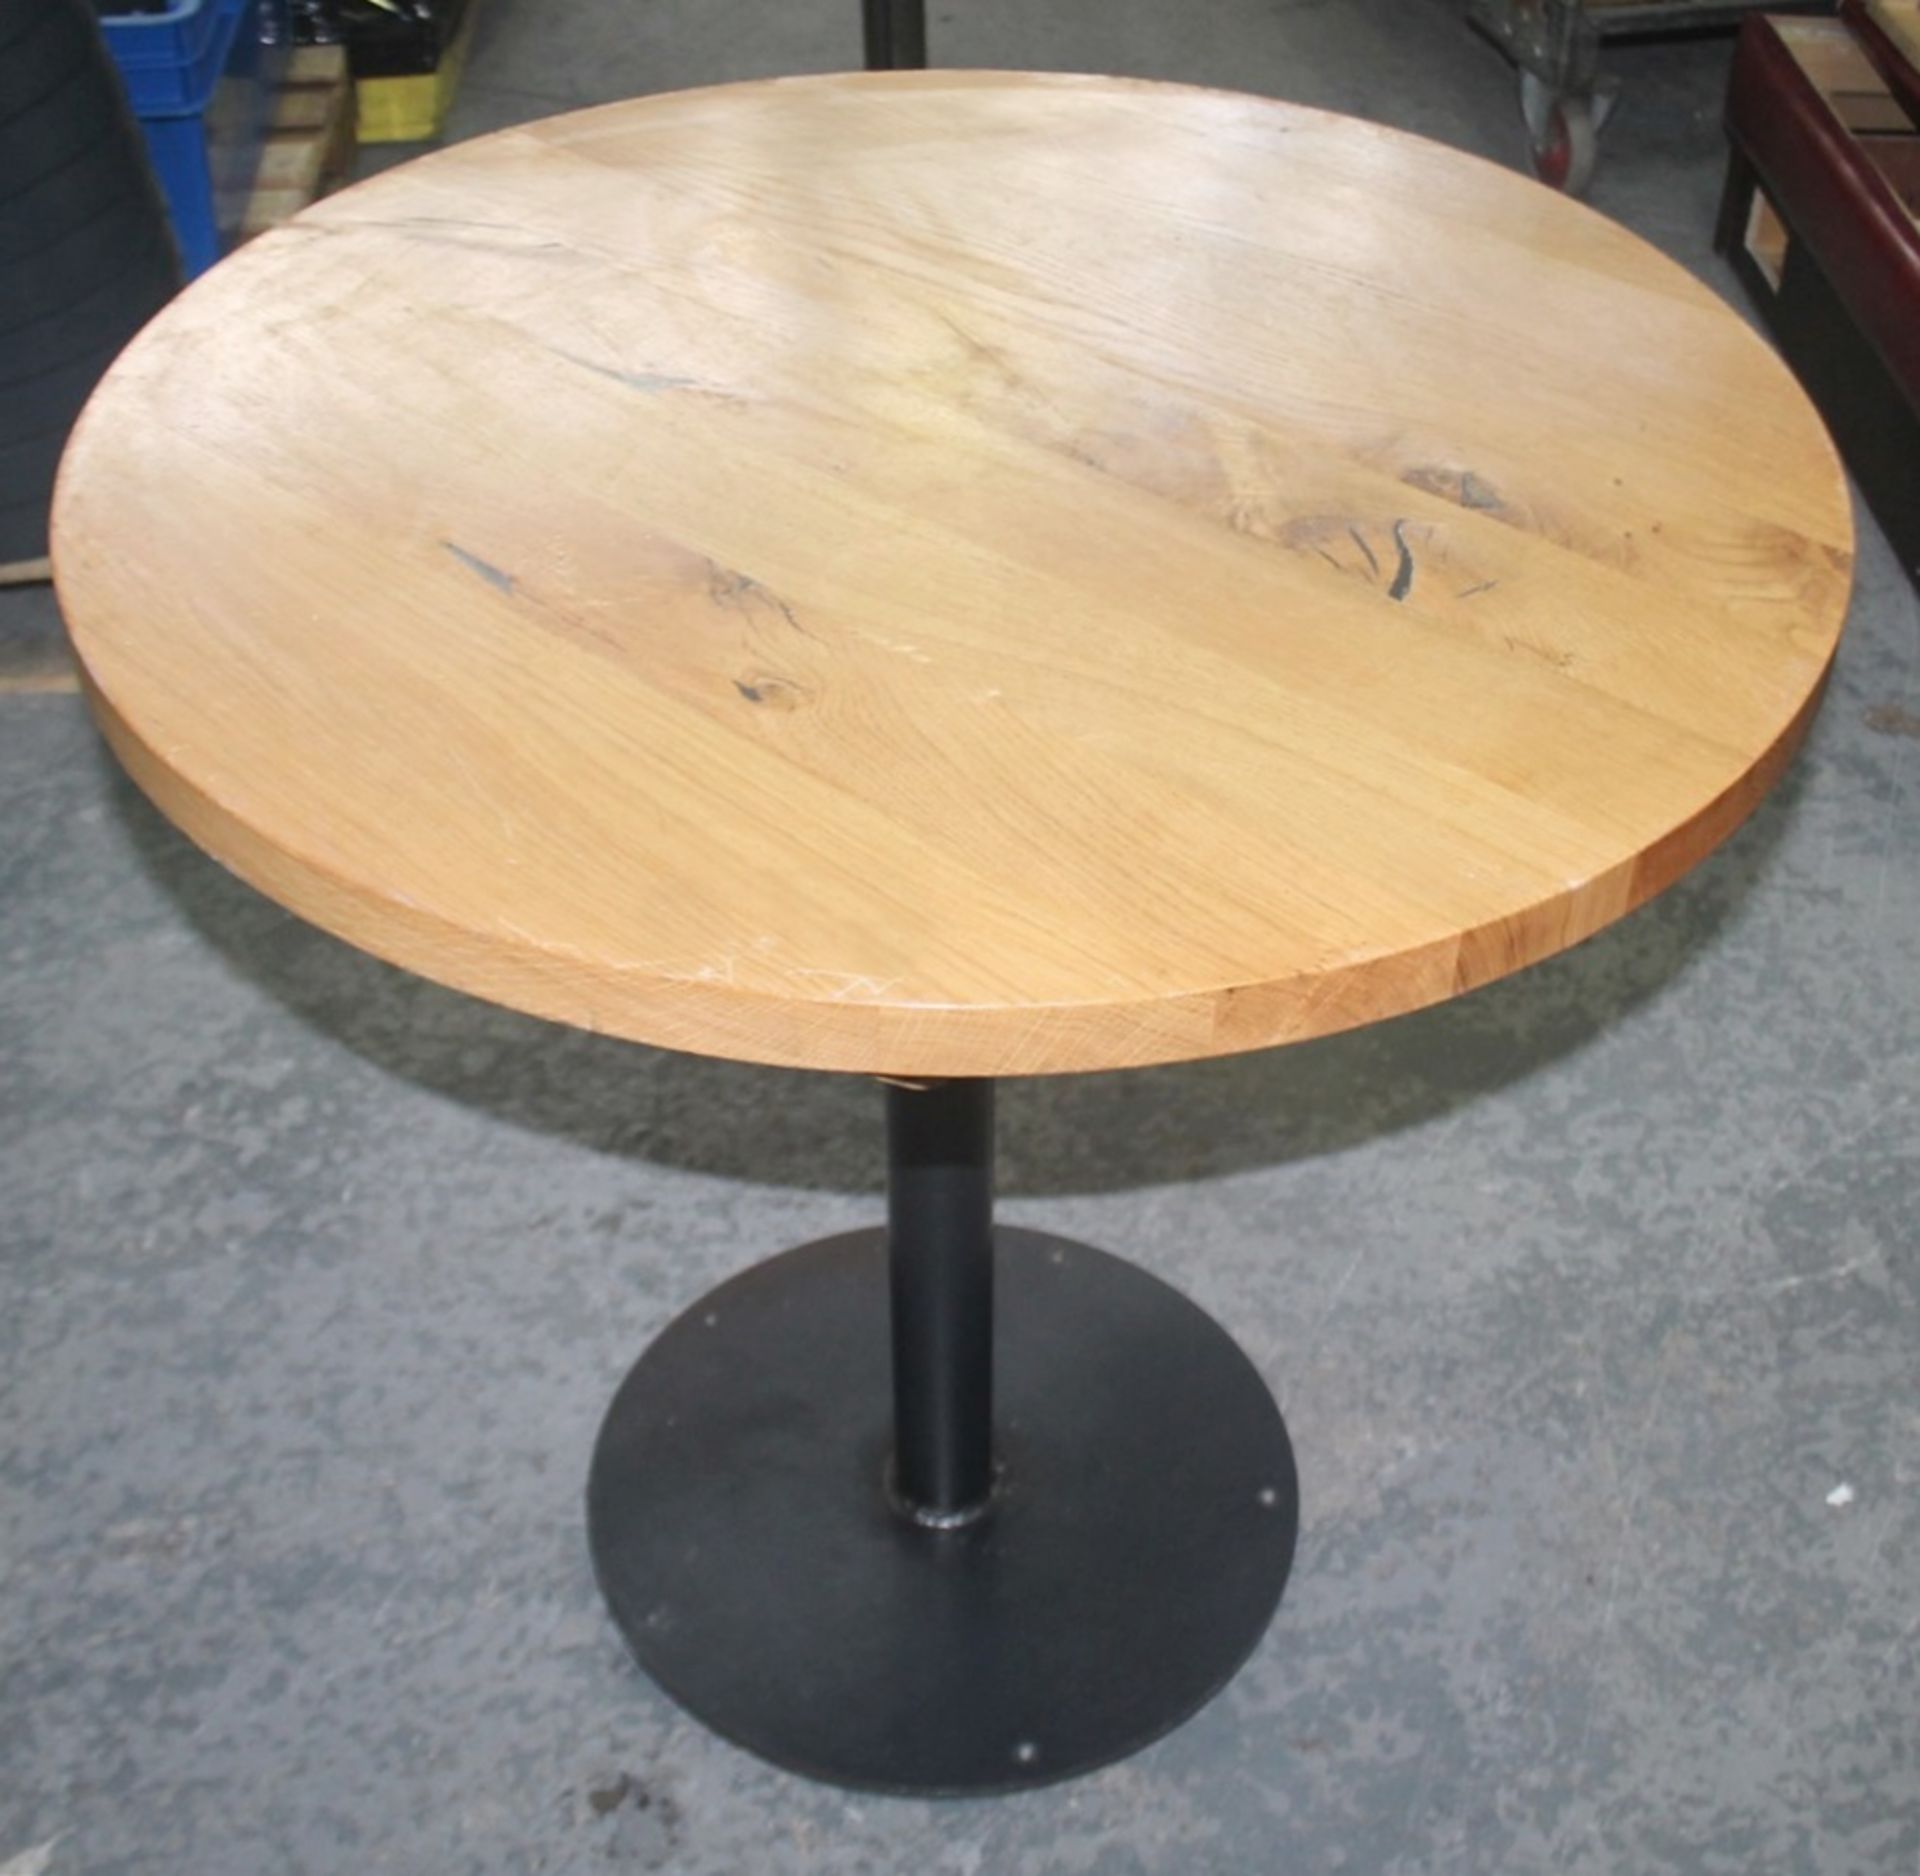 4 x Solid Oak Round Restaurant Dining Tables - Natural Rustic Knotty Oak Tops With Black Cast Iron - Image 2 of 2